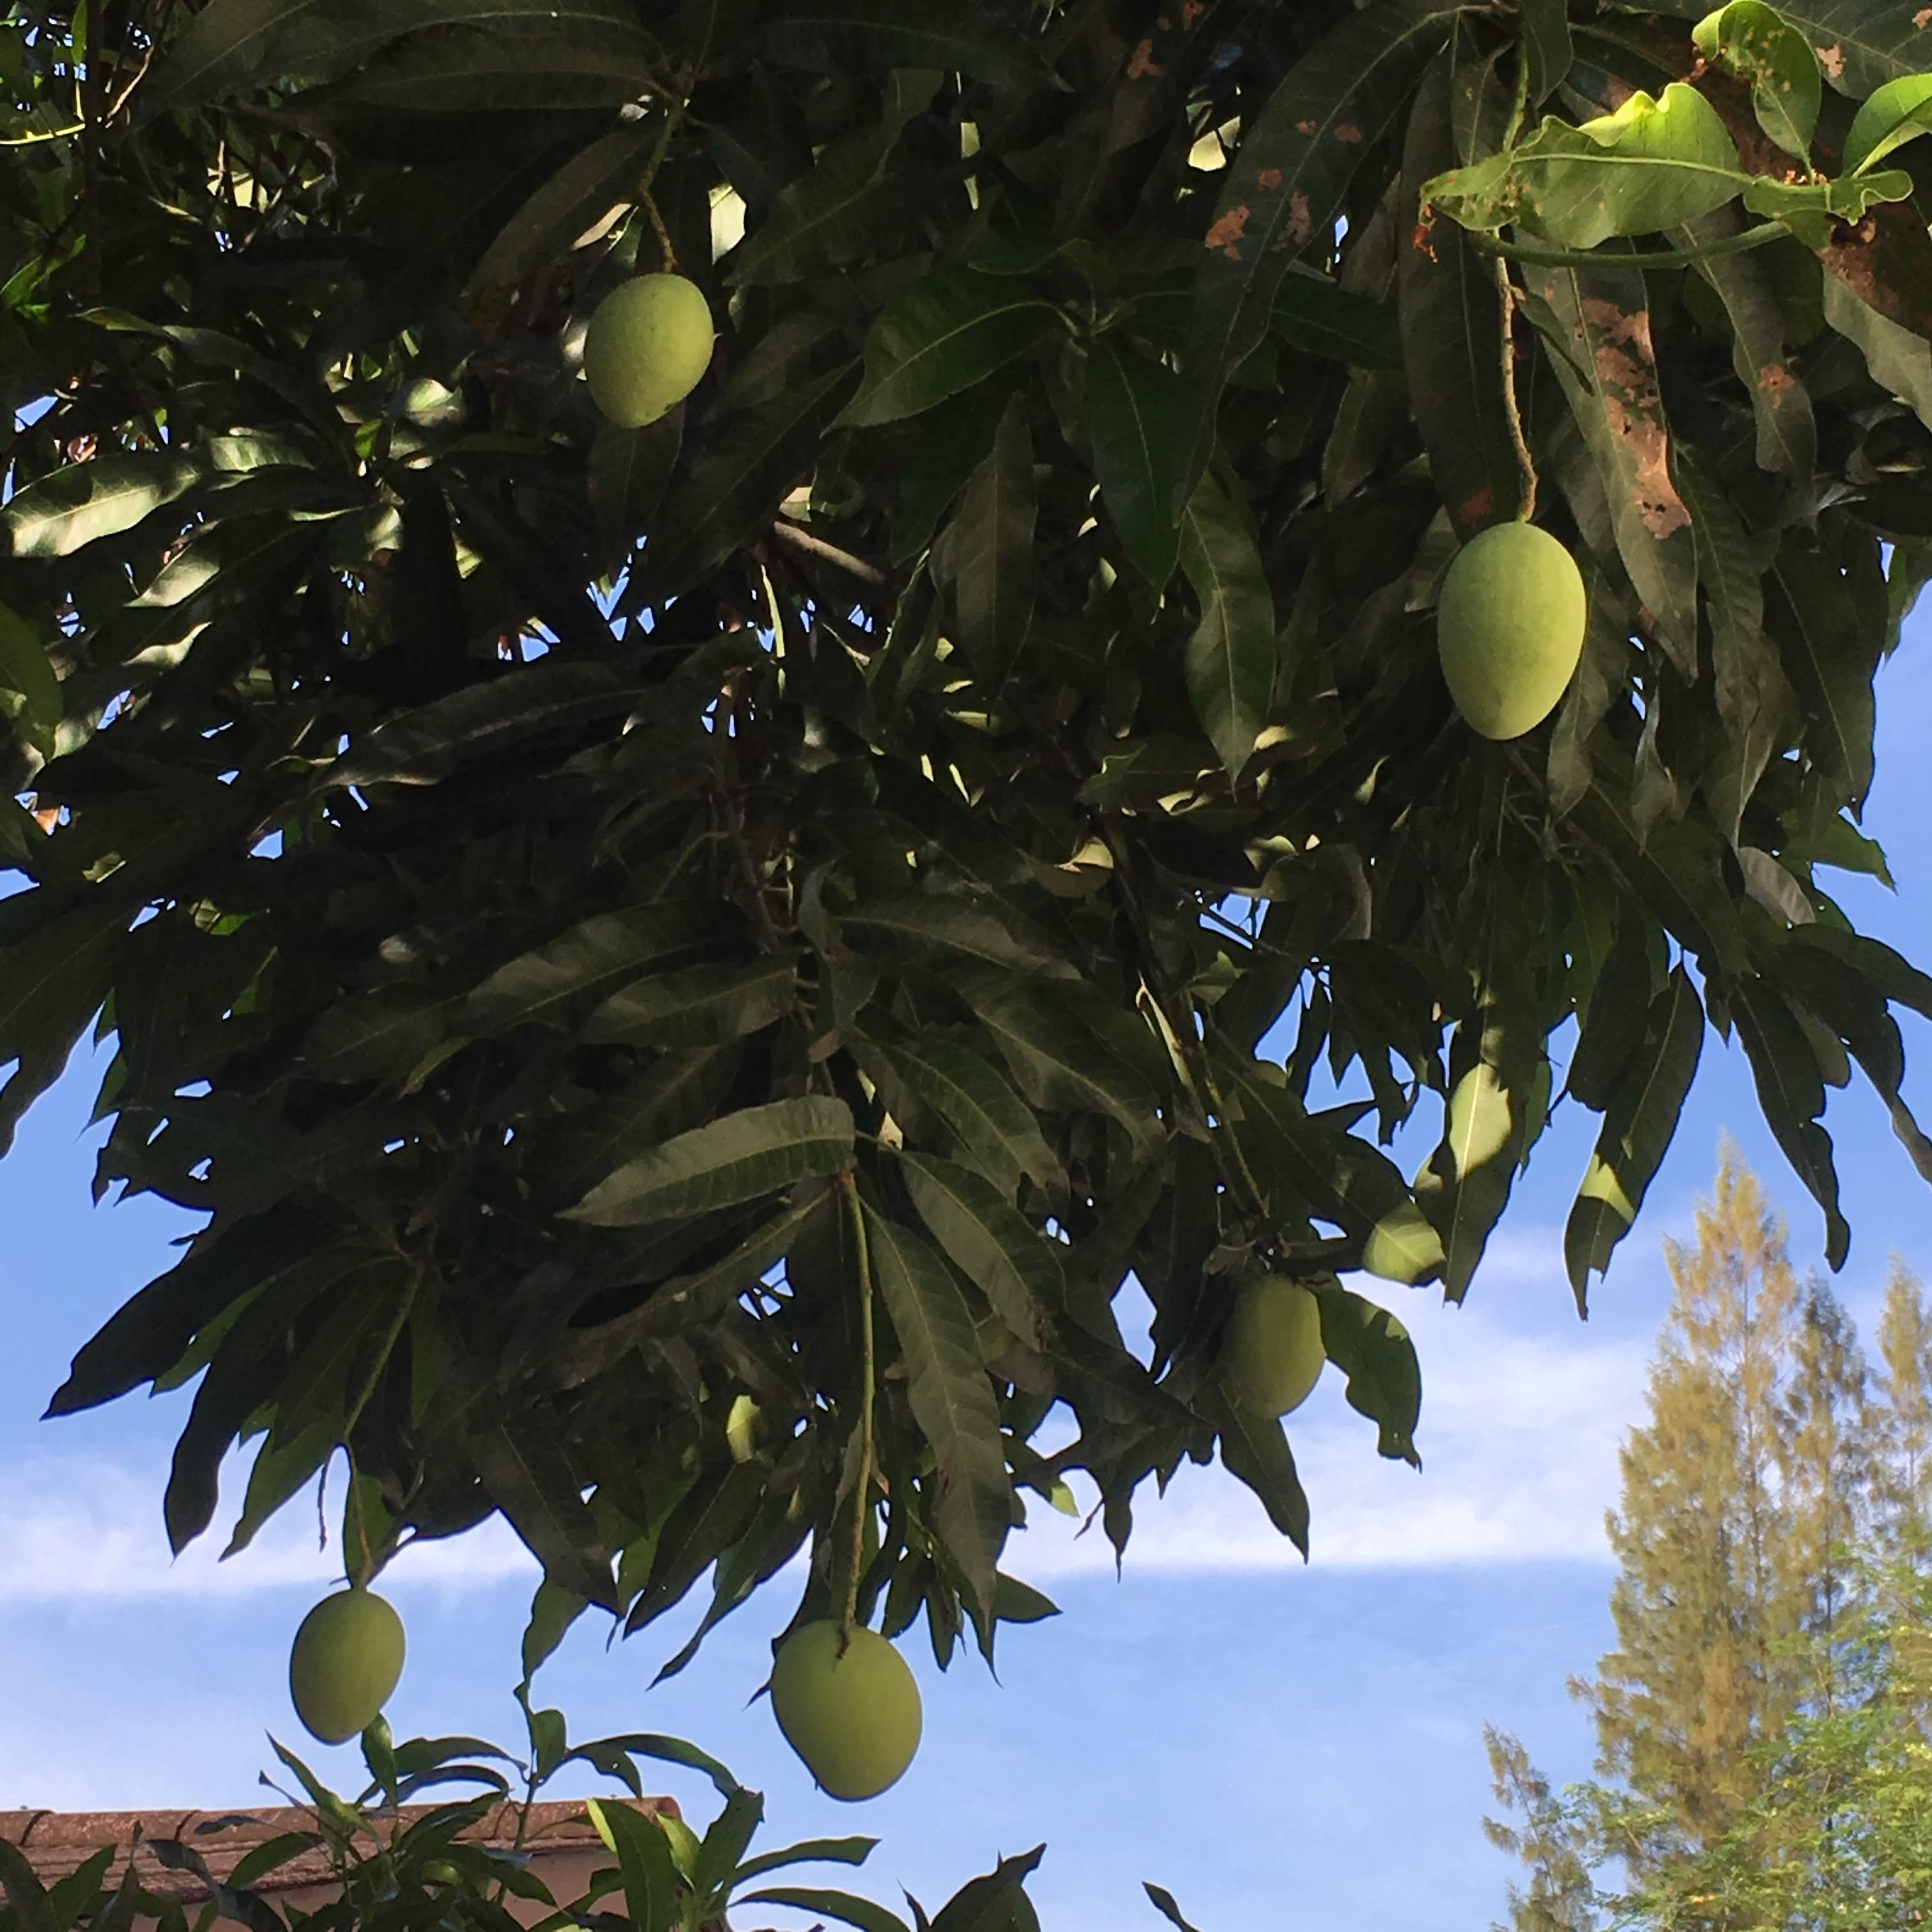 Mango tree in our WorkAway home.